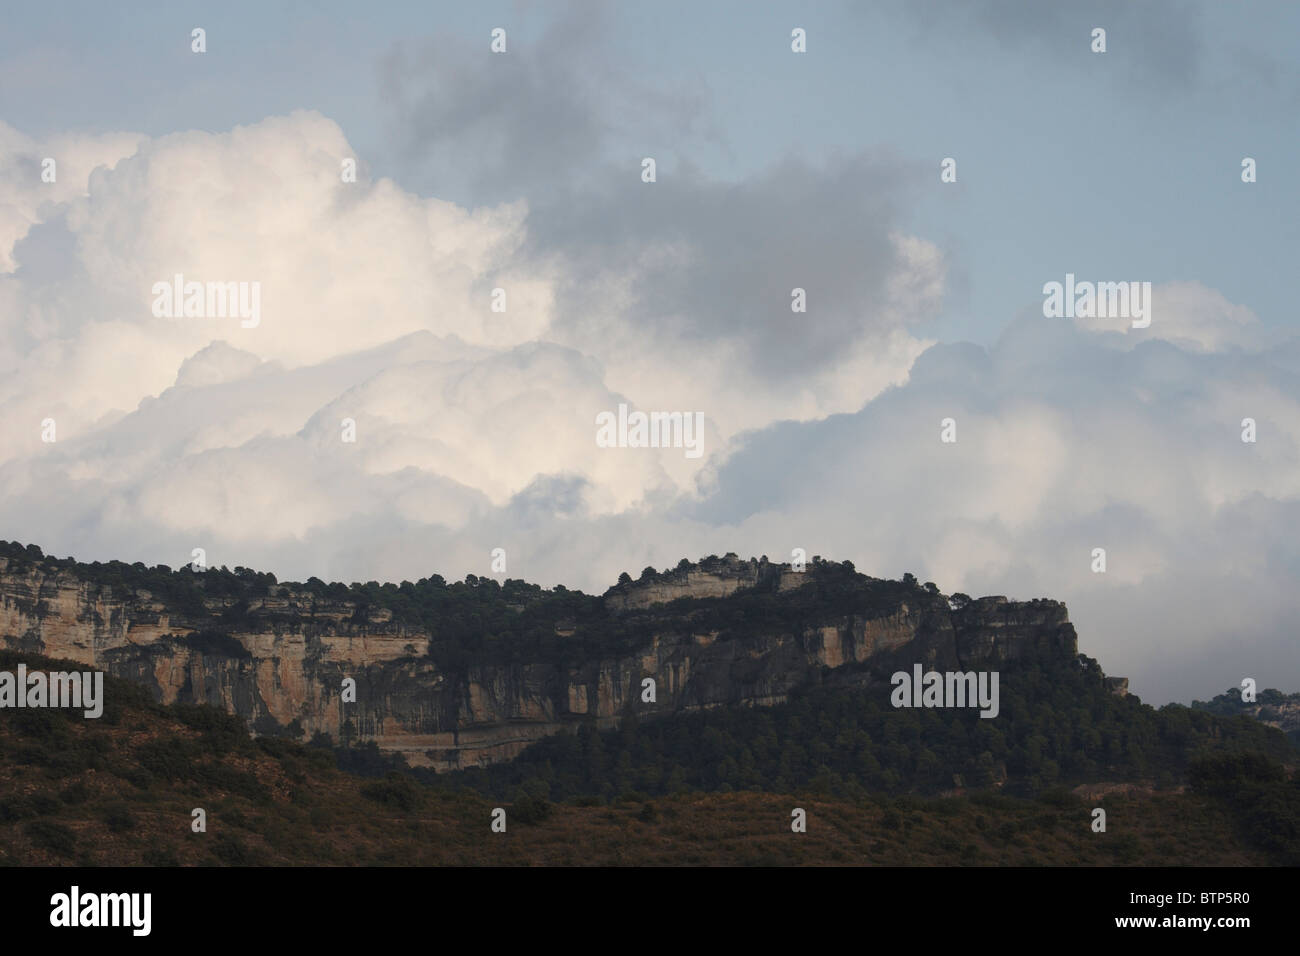 Spain, Catalunya, Priorat, View of mountain with cloudy sky Stock Photo